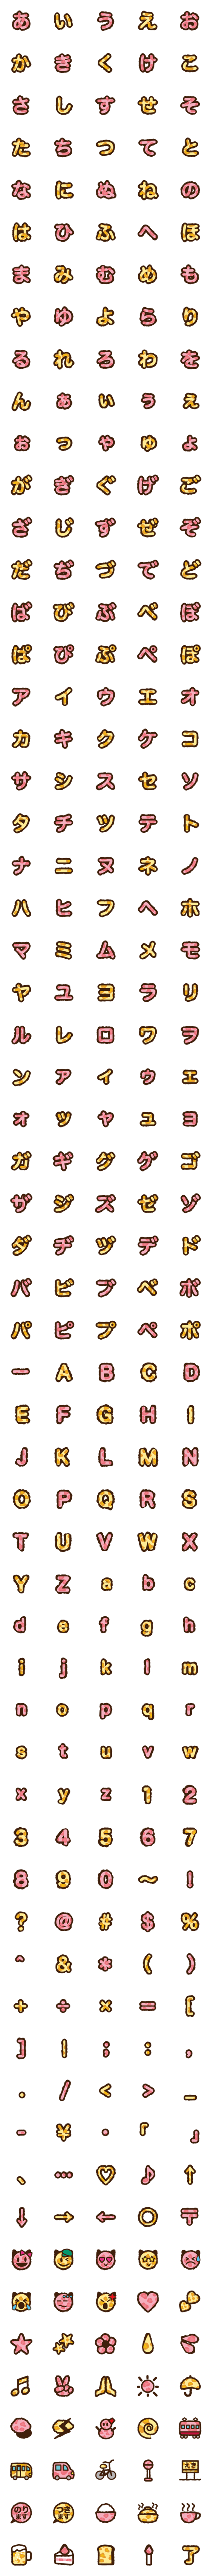 [LINE絵文字]レオパード柄の画像一覧